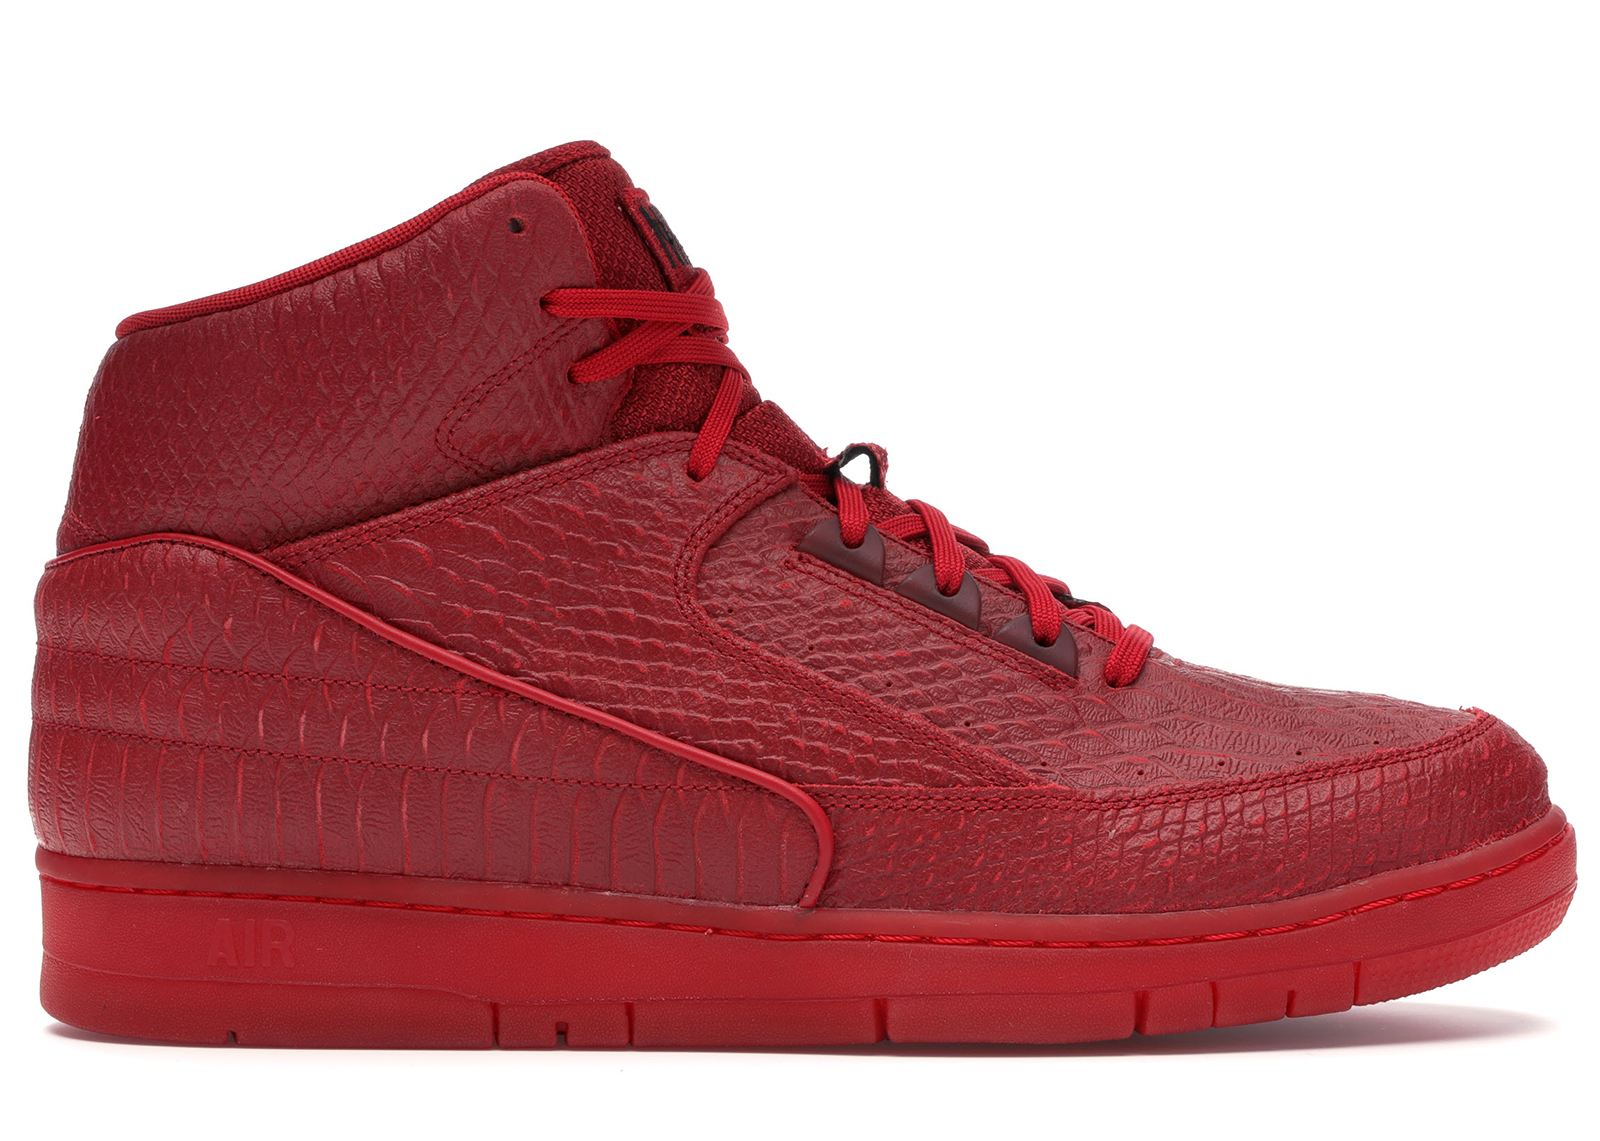 Nike Air Python Red October - 705066-600